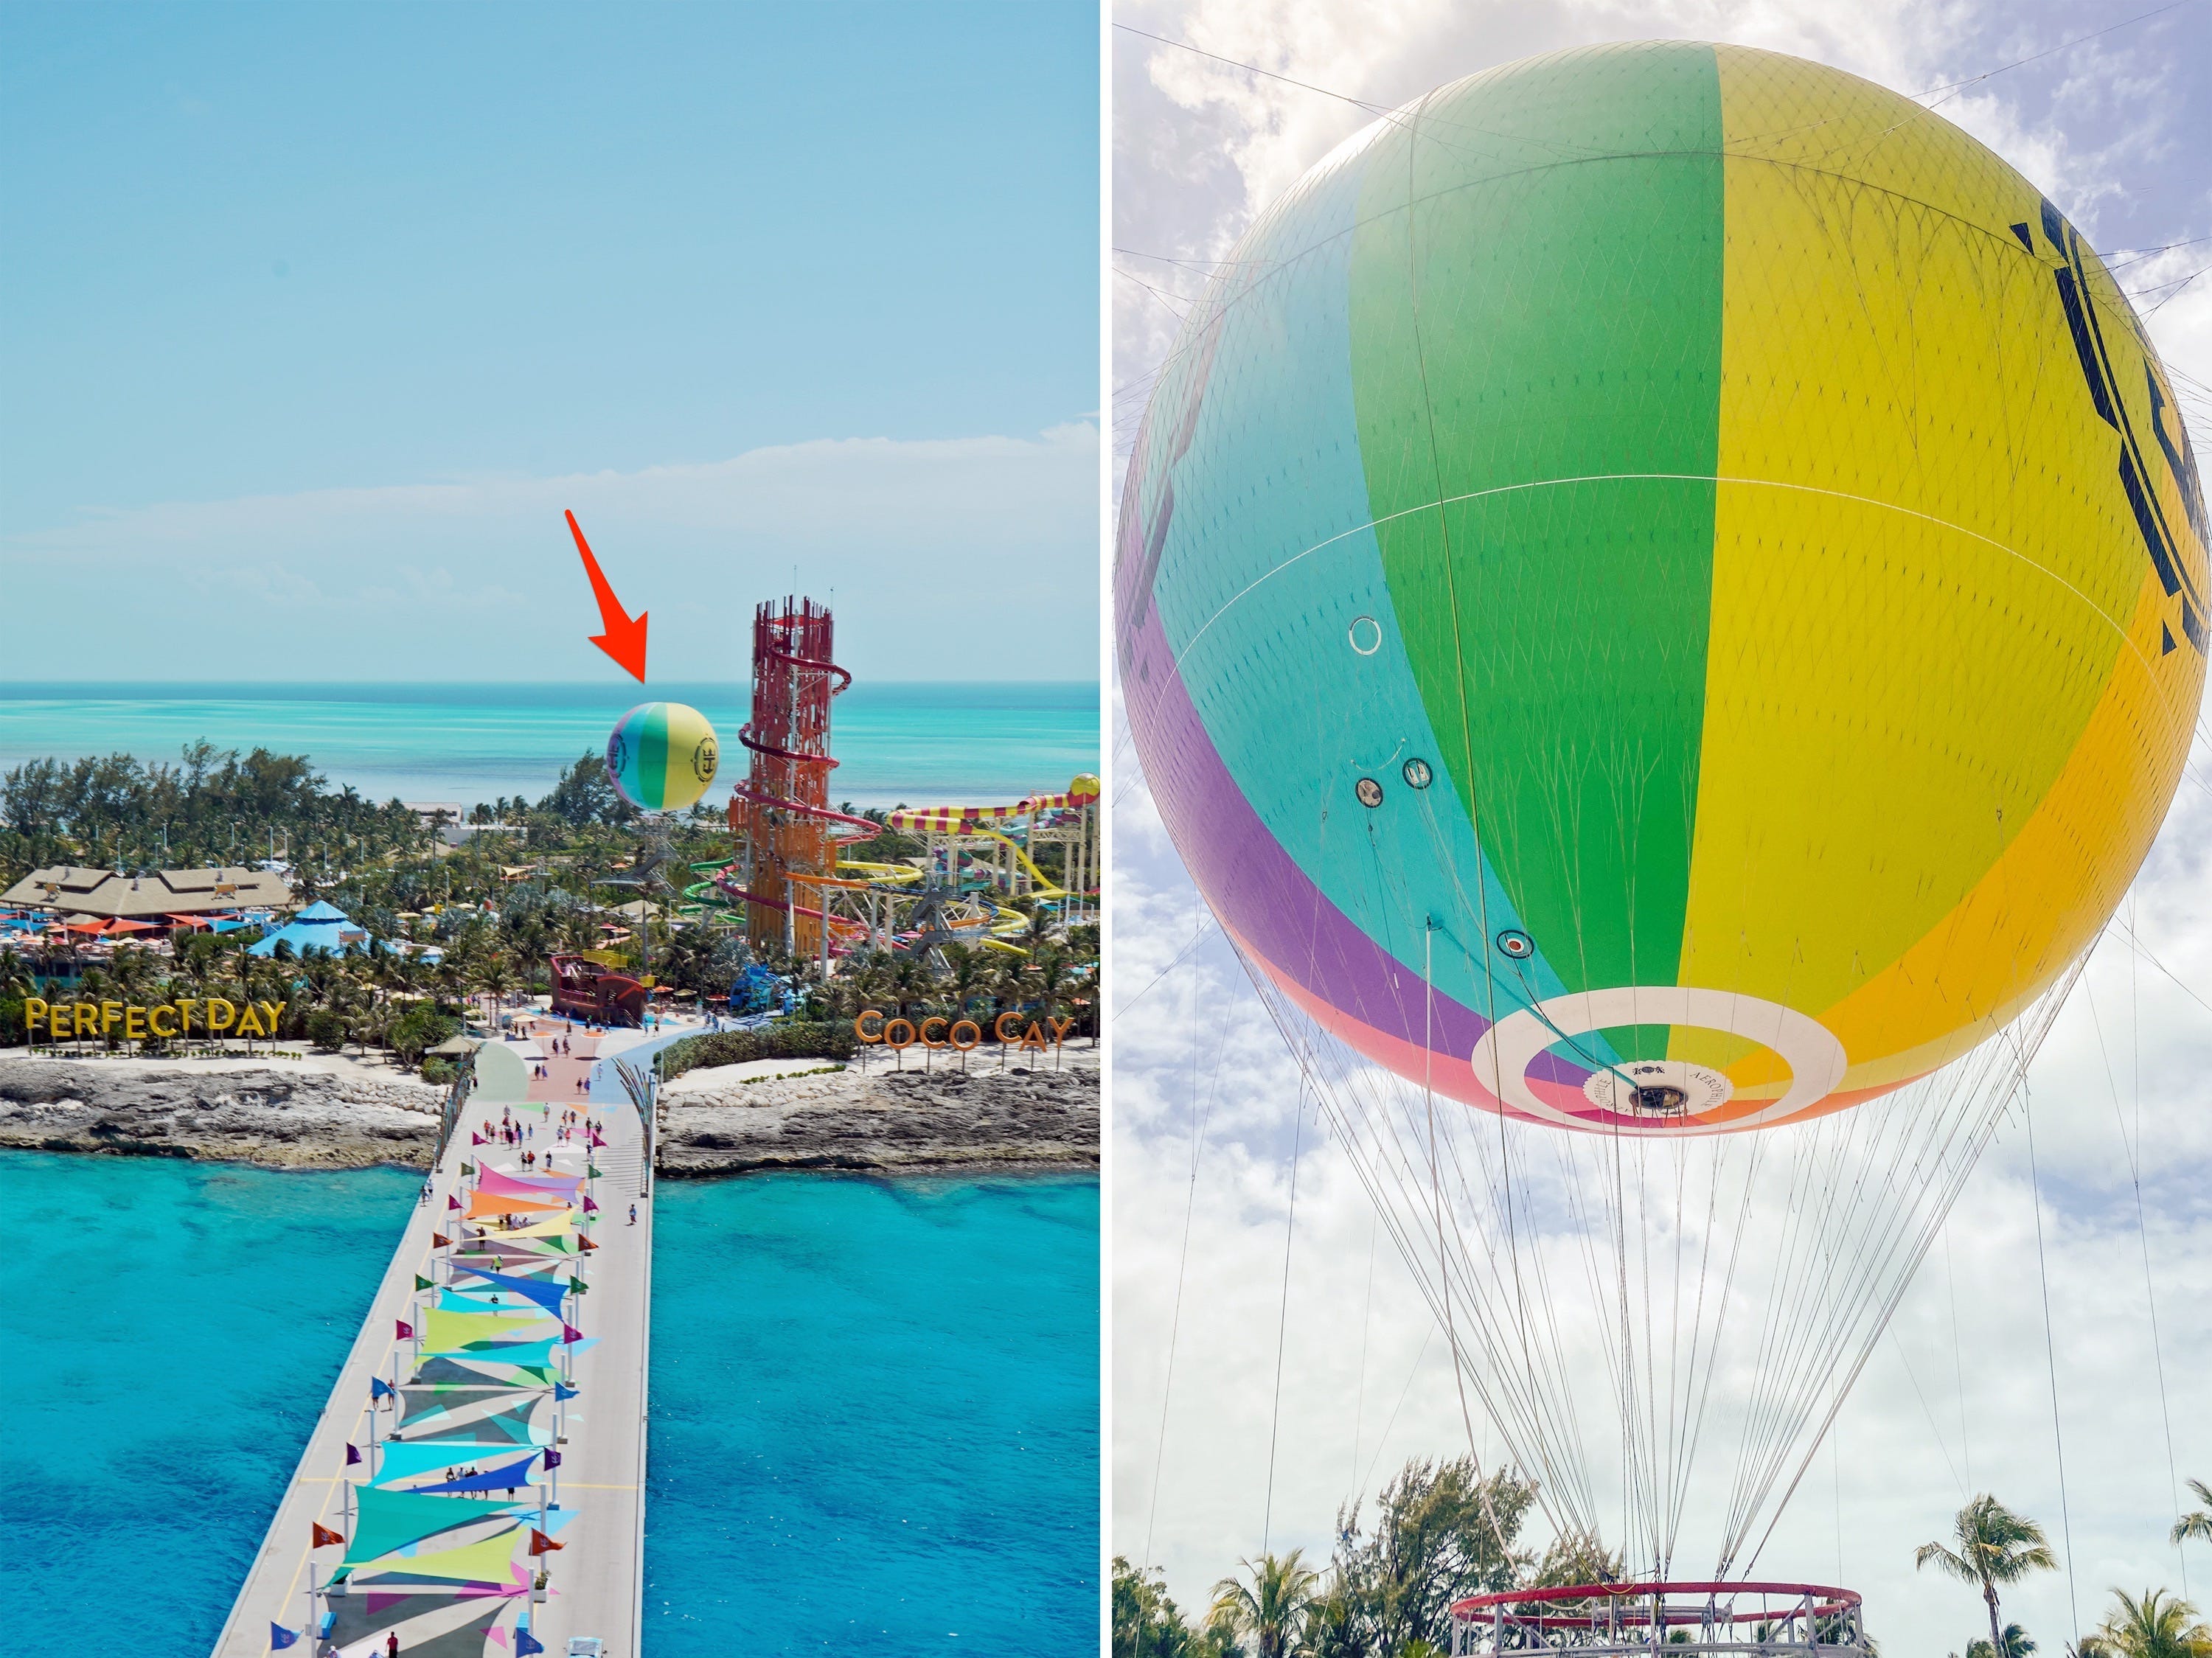 <p>The excursion I was most thrilled about —  a hot air balloon ride over the Bahamas — was canceled the day of because the winds were too high.</p><p>It was on the last day of my trip, and with only one day in port, it could not be rescheduled. It was the experience I was looking forward to most, so I was disappointed and didn't realize this was a possibility going into the trip. On a cruise ship, I learned that all plans are subject to change based on things outside the crew's control, like the weather. </p>